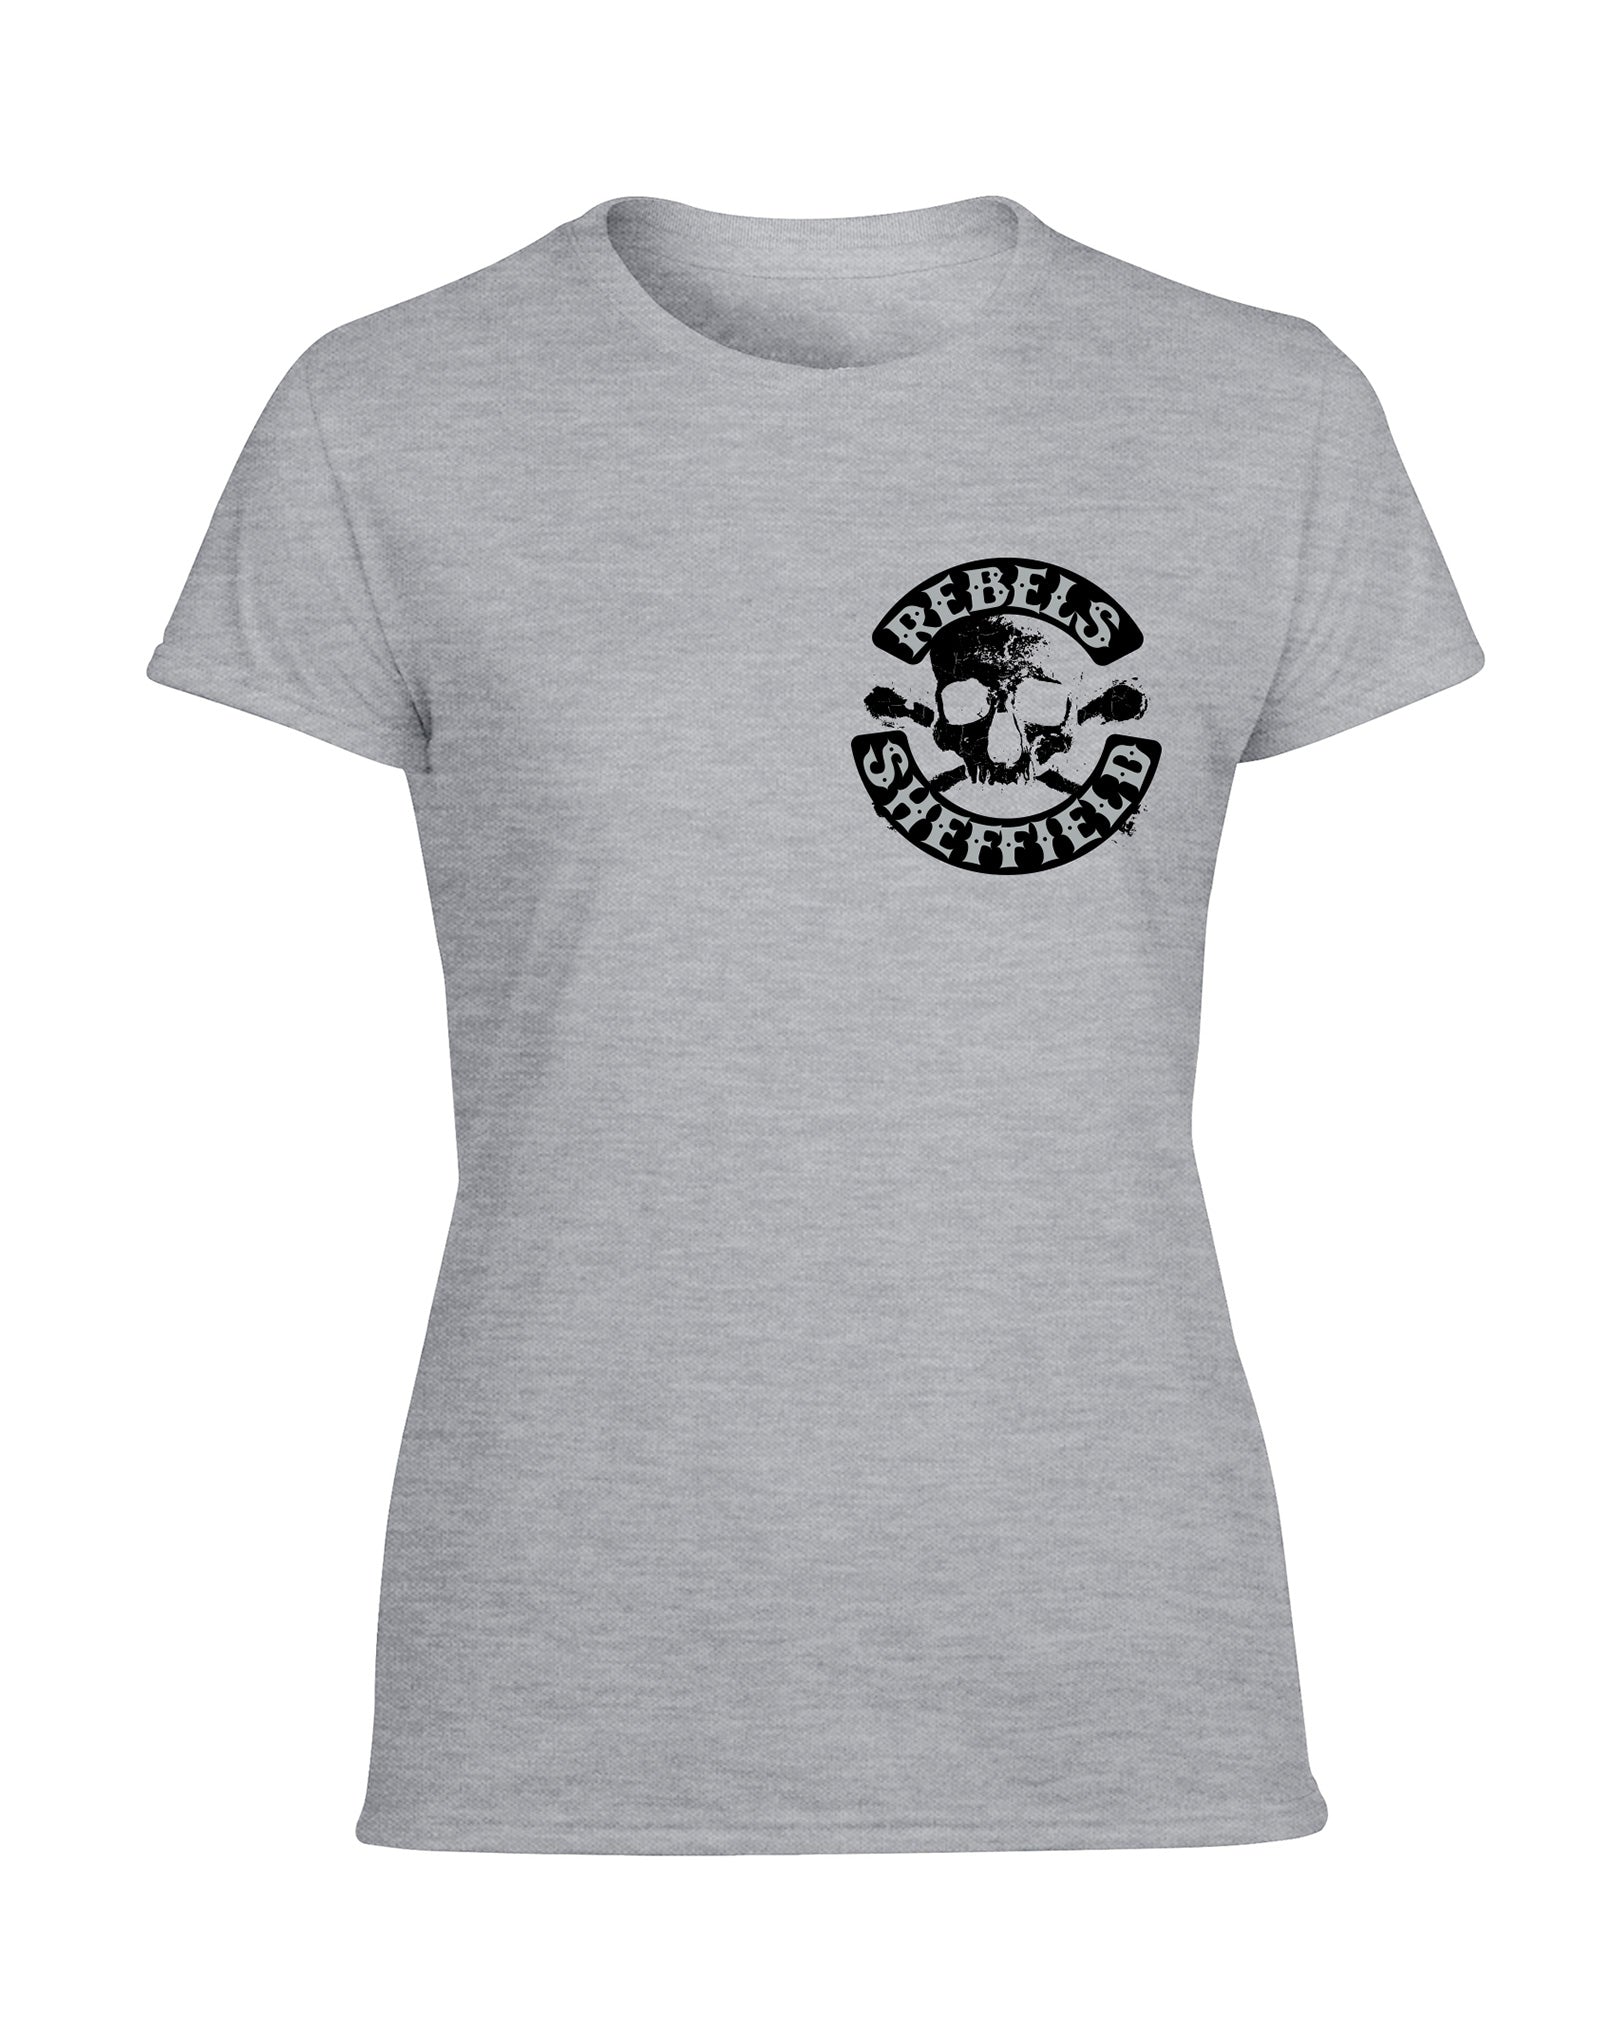 Rebels small skull ladies fit T-shirt - various colours - Dirty Stop Outs